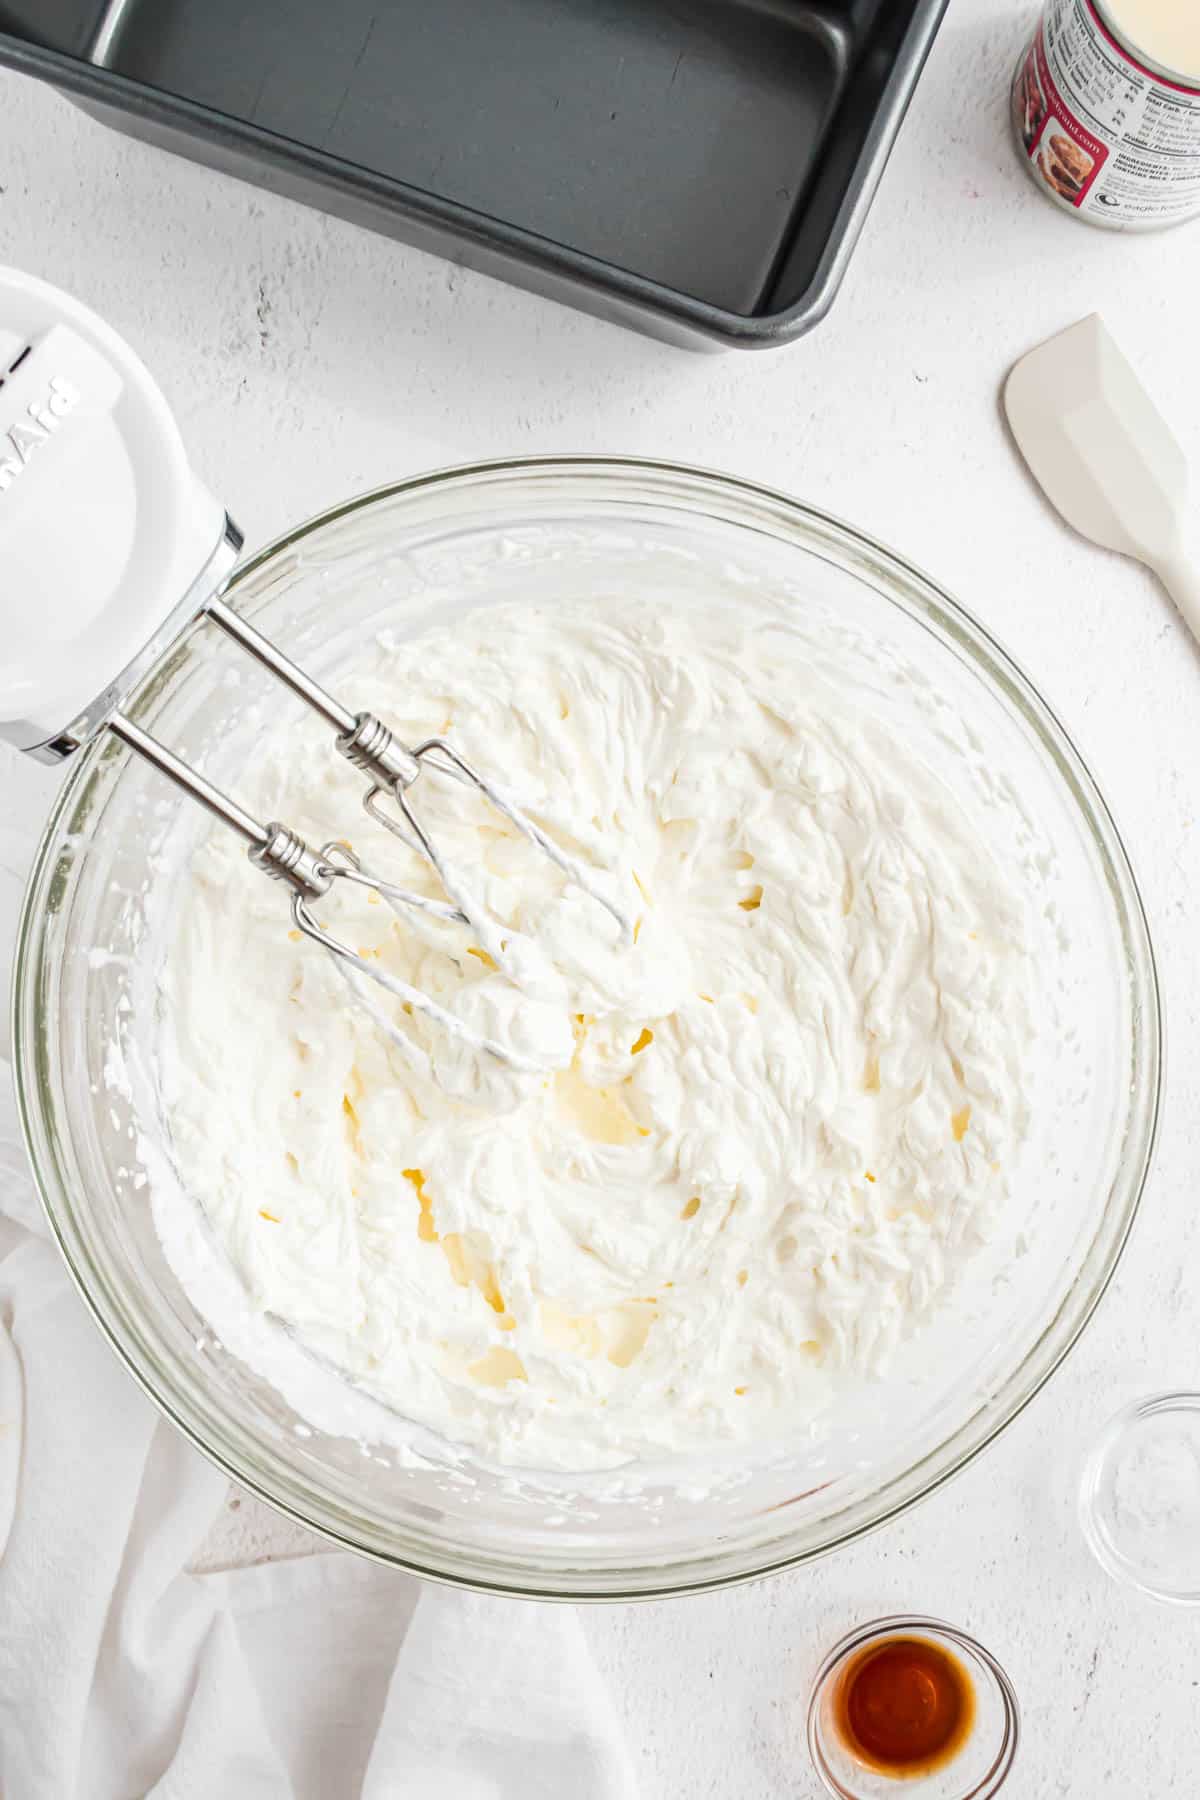 A hand mixer being used to beat heavy cream into stiff peaks in a glass bowl.